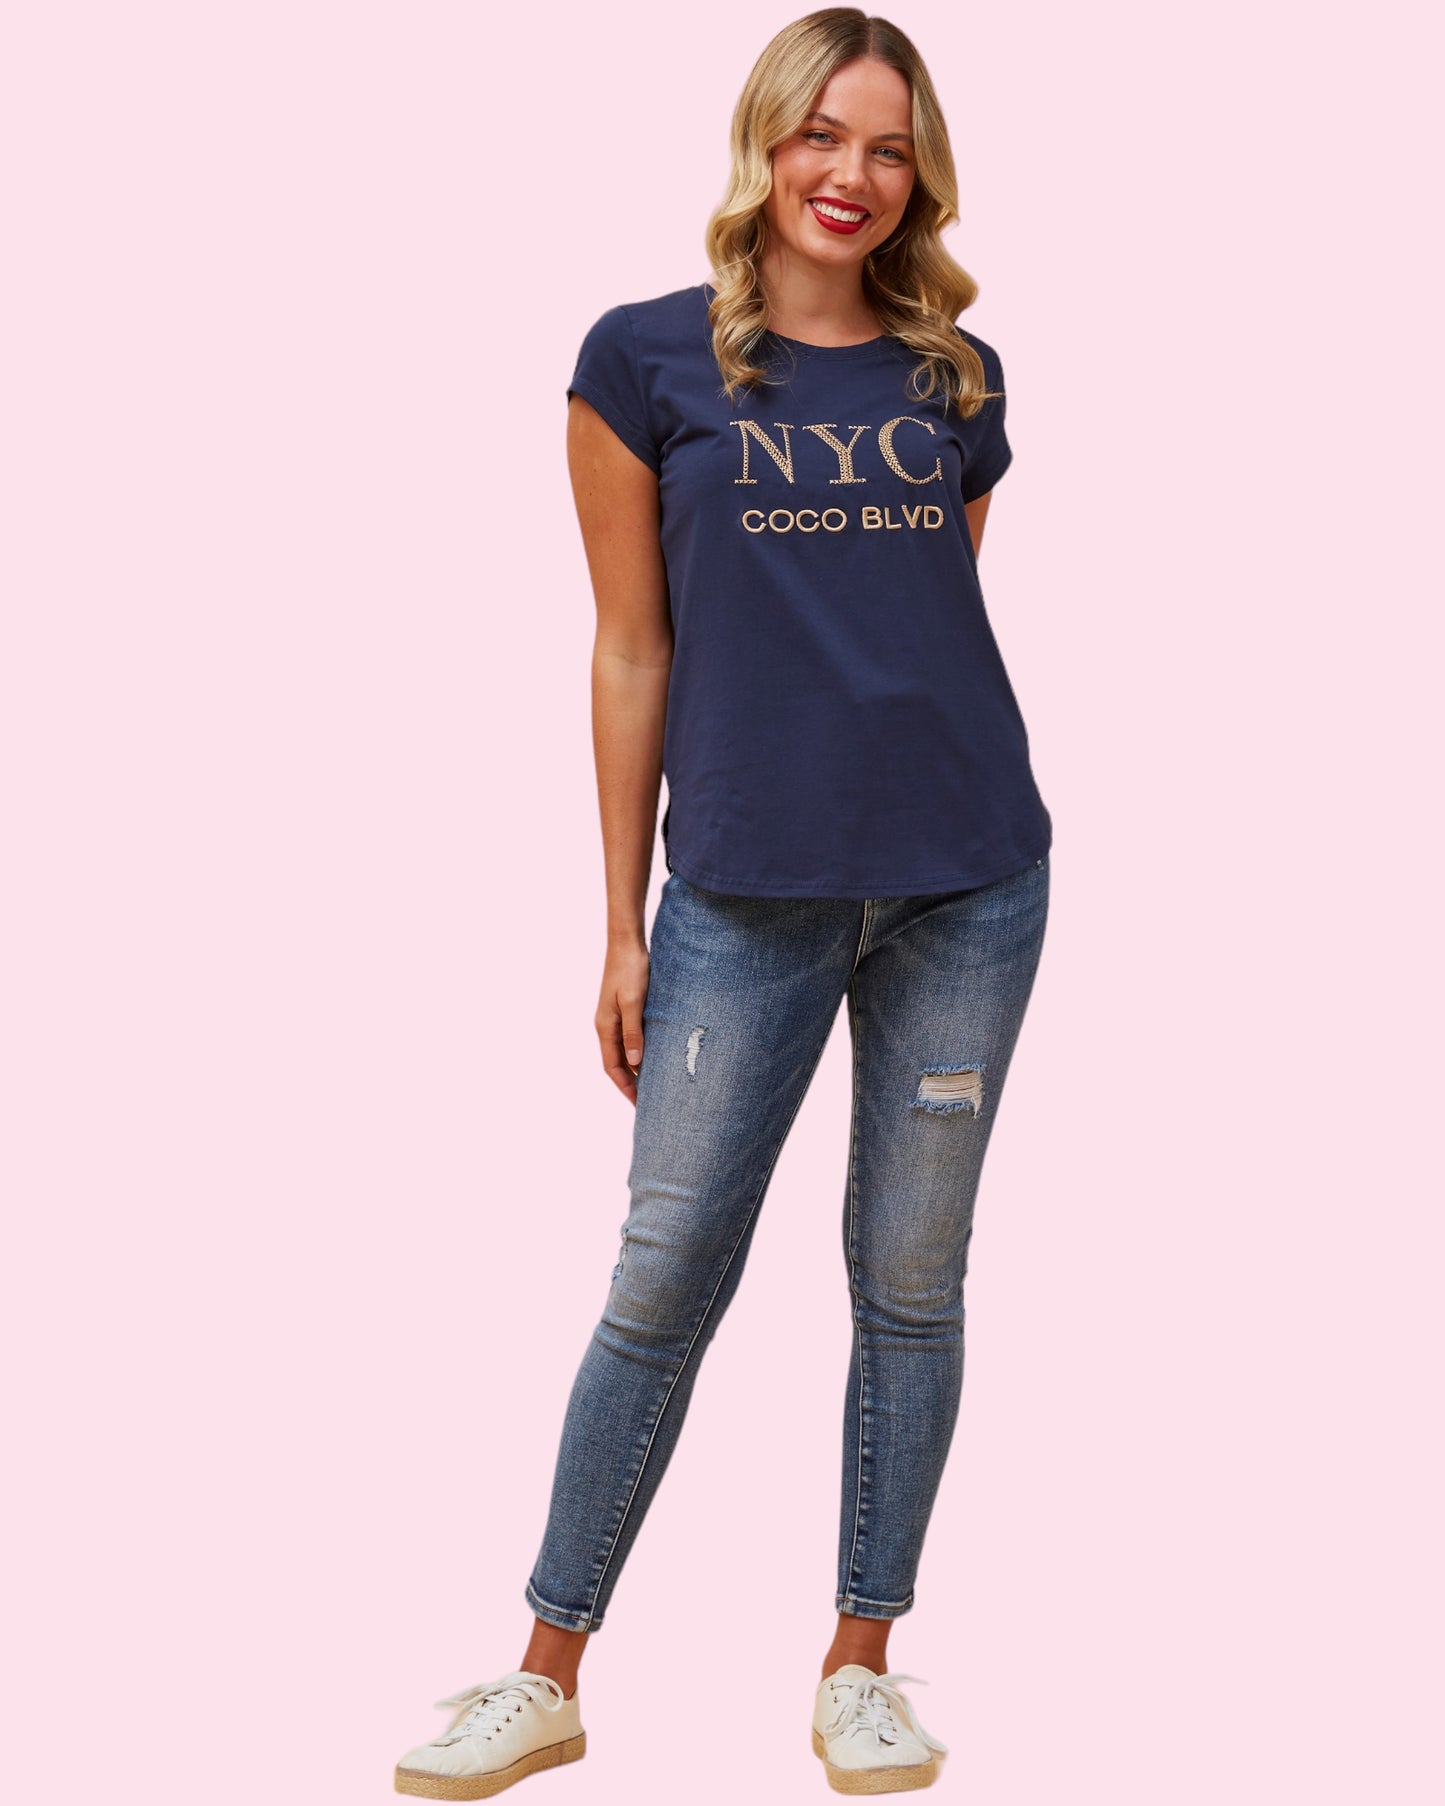 NYC Embroided Tee - Navy